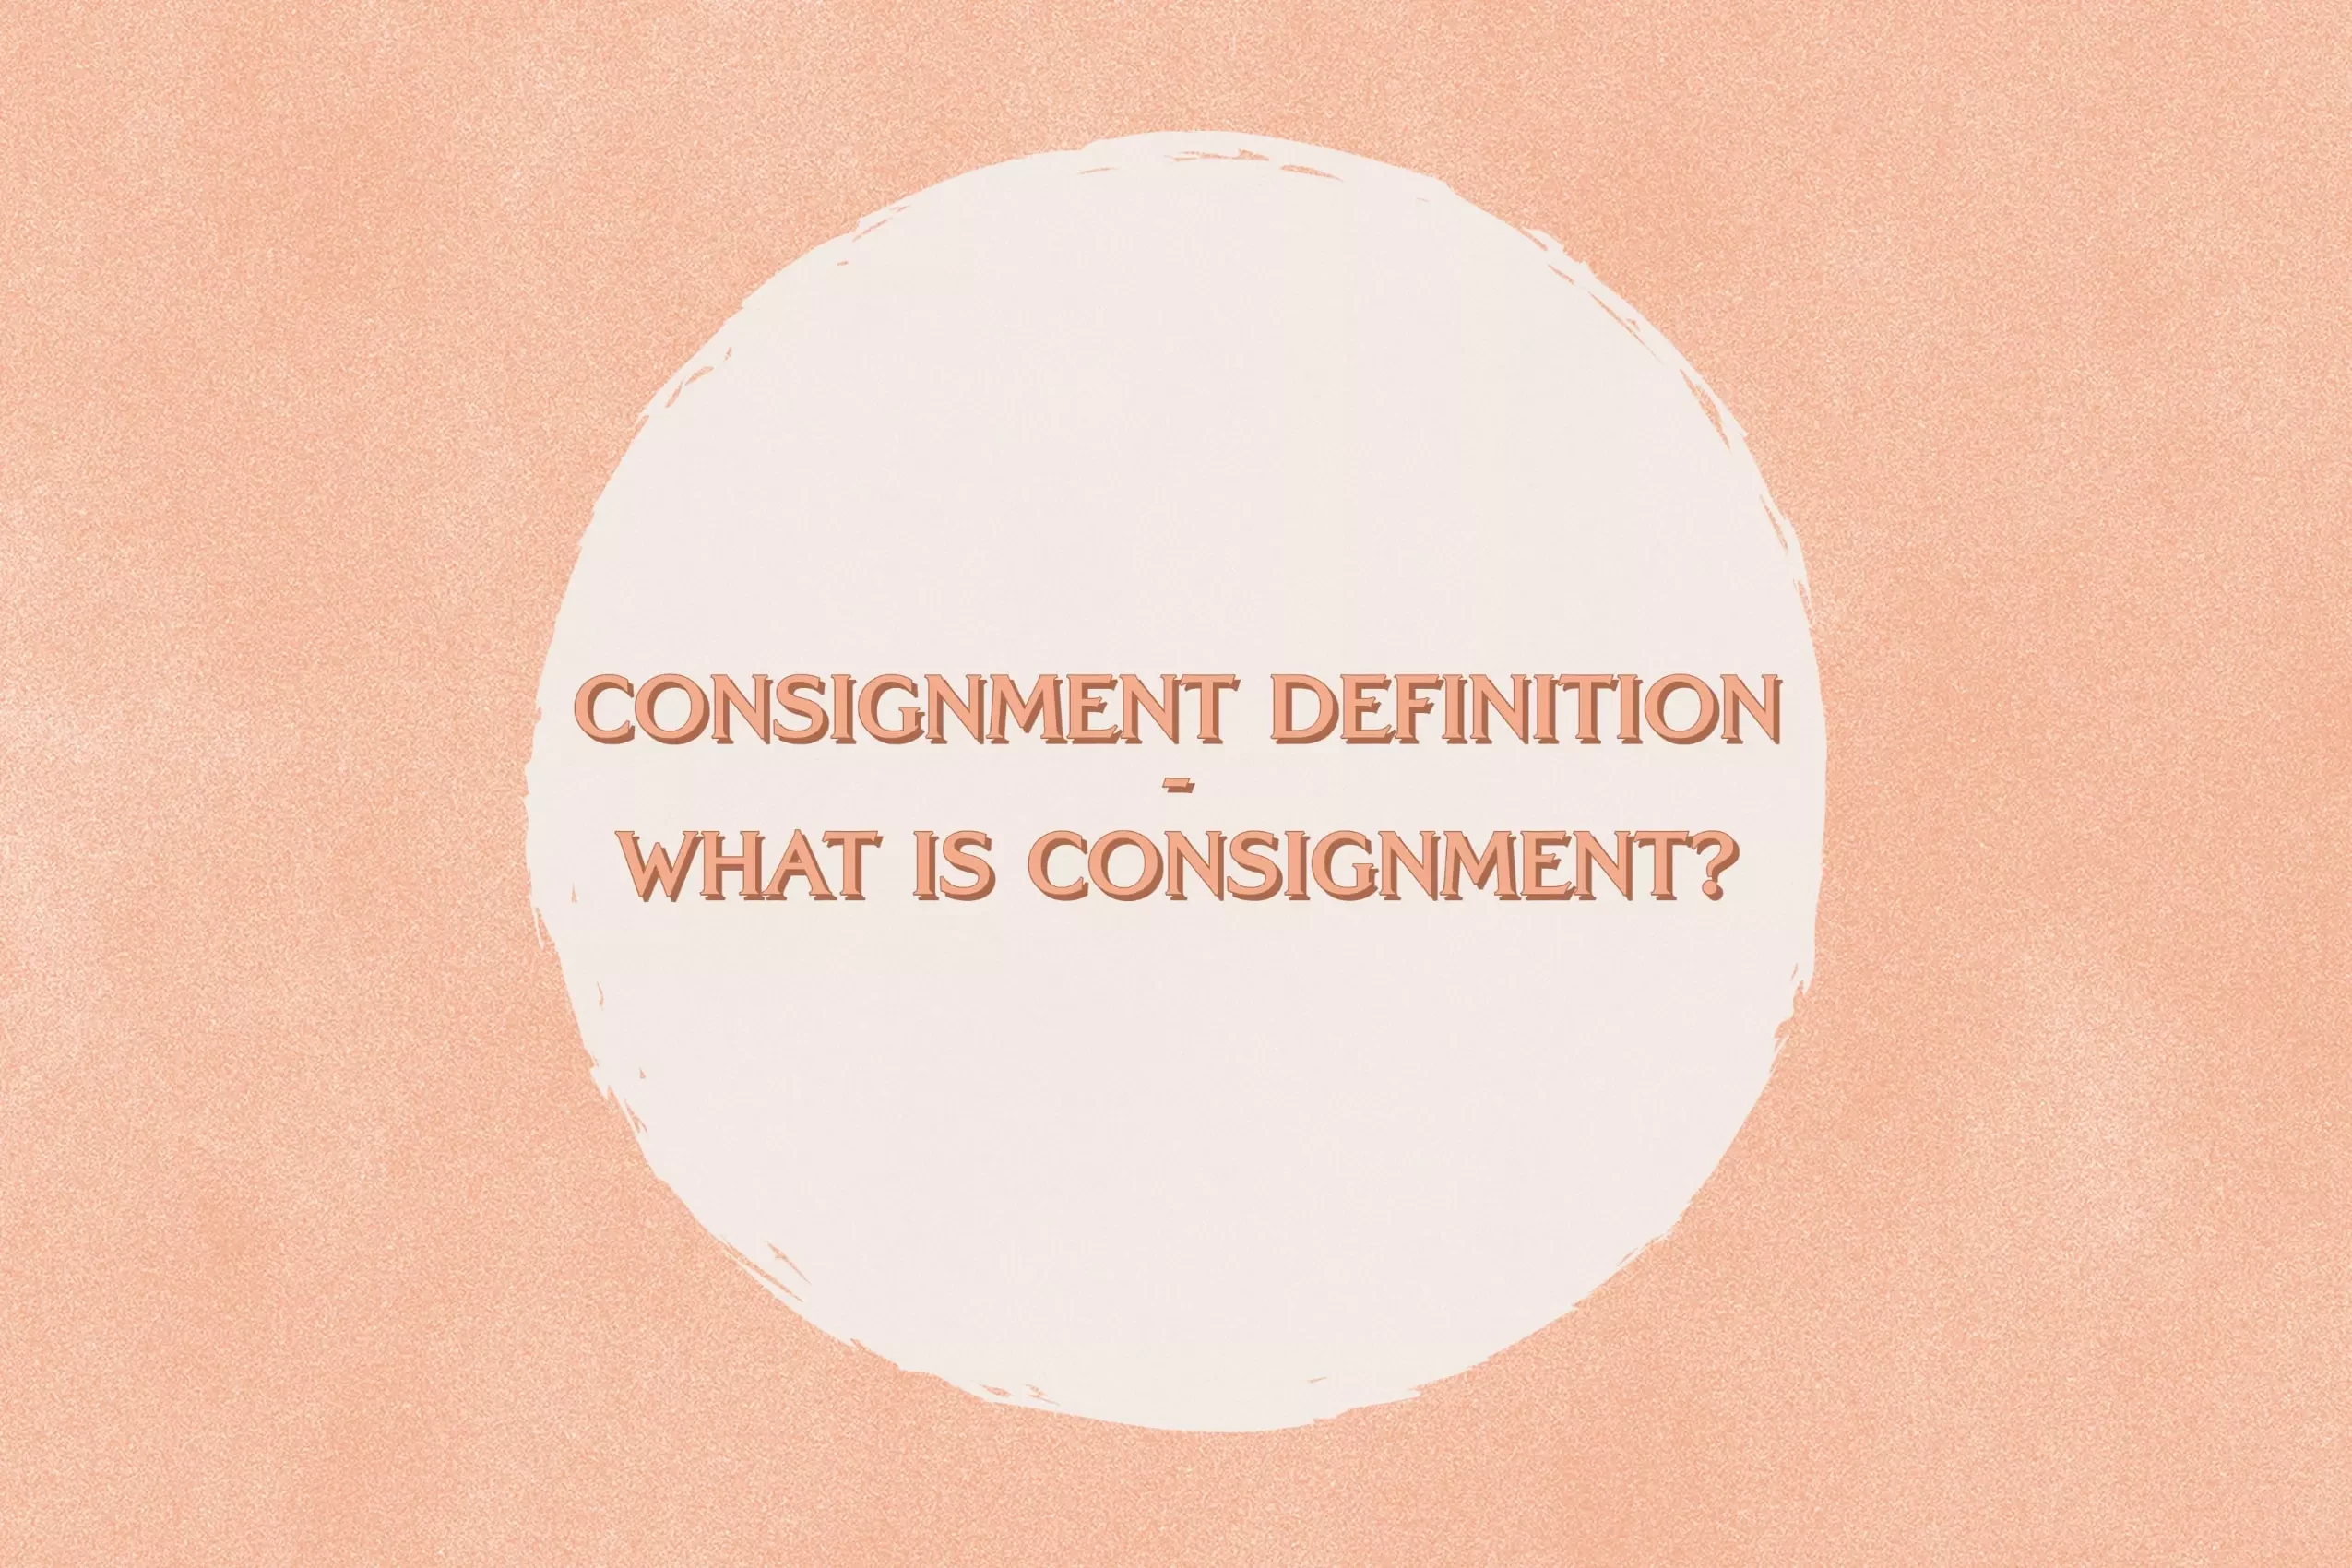 Consignment Definition - What is Consignment?